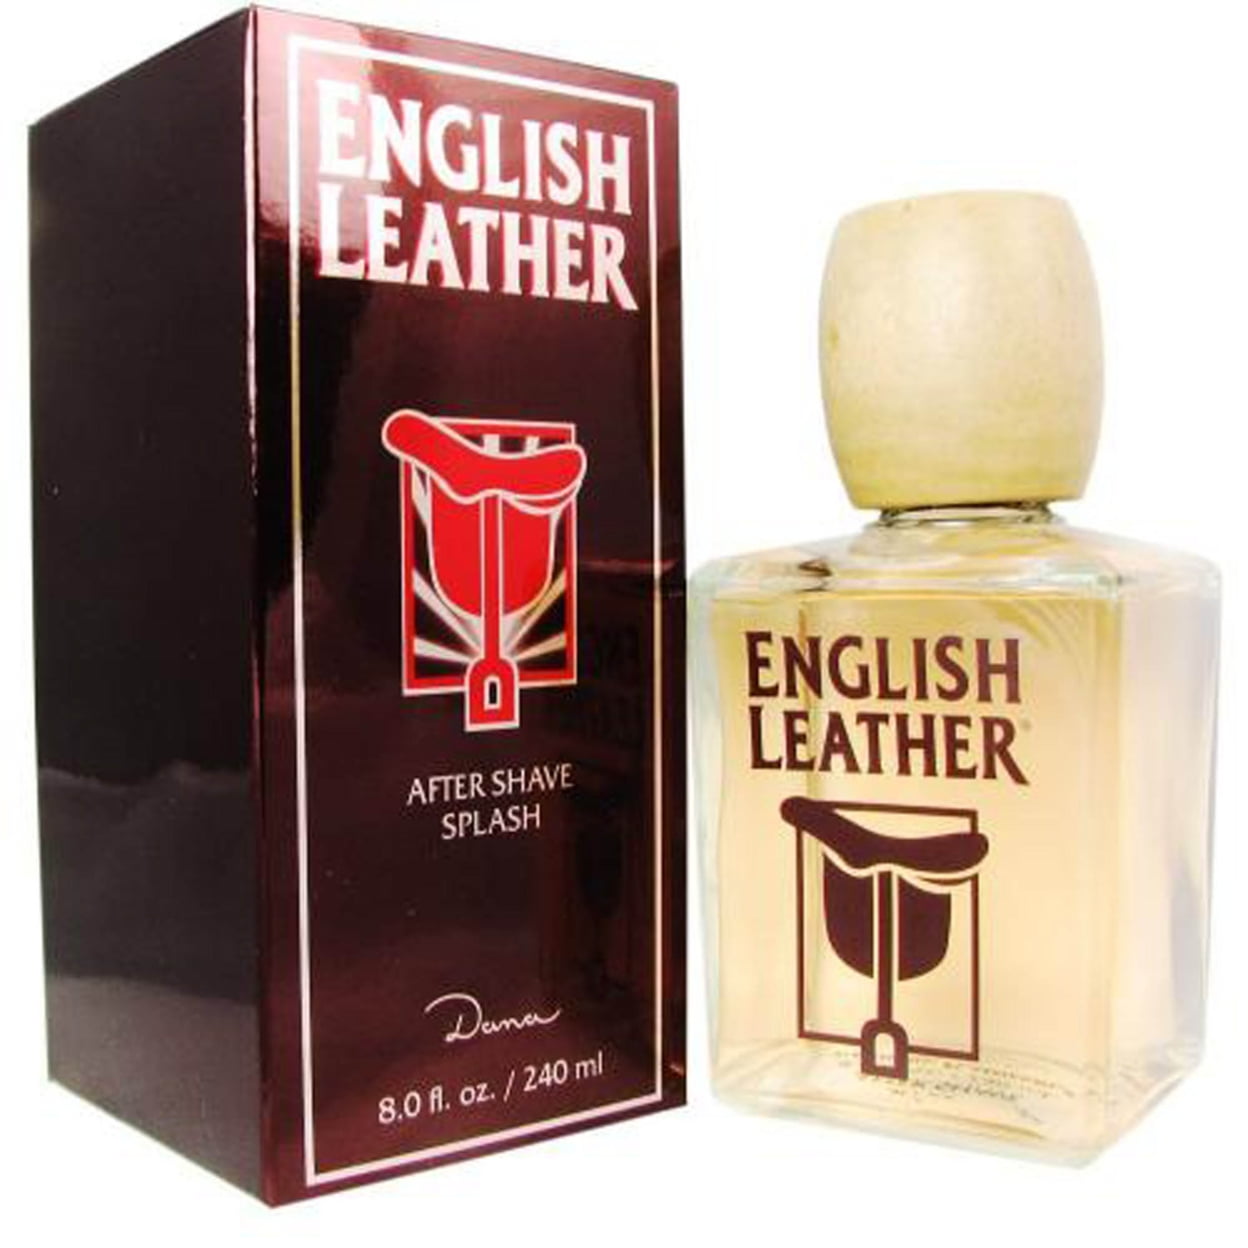 English Leather Fragrance Review, Old School Classic Fragrance